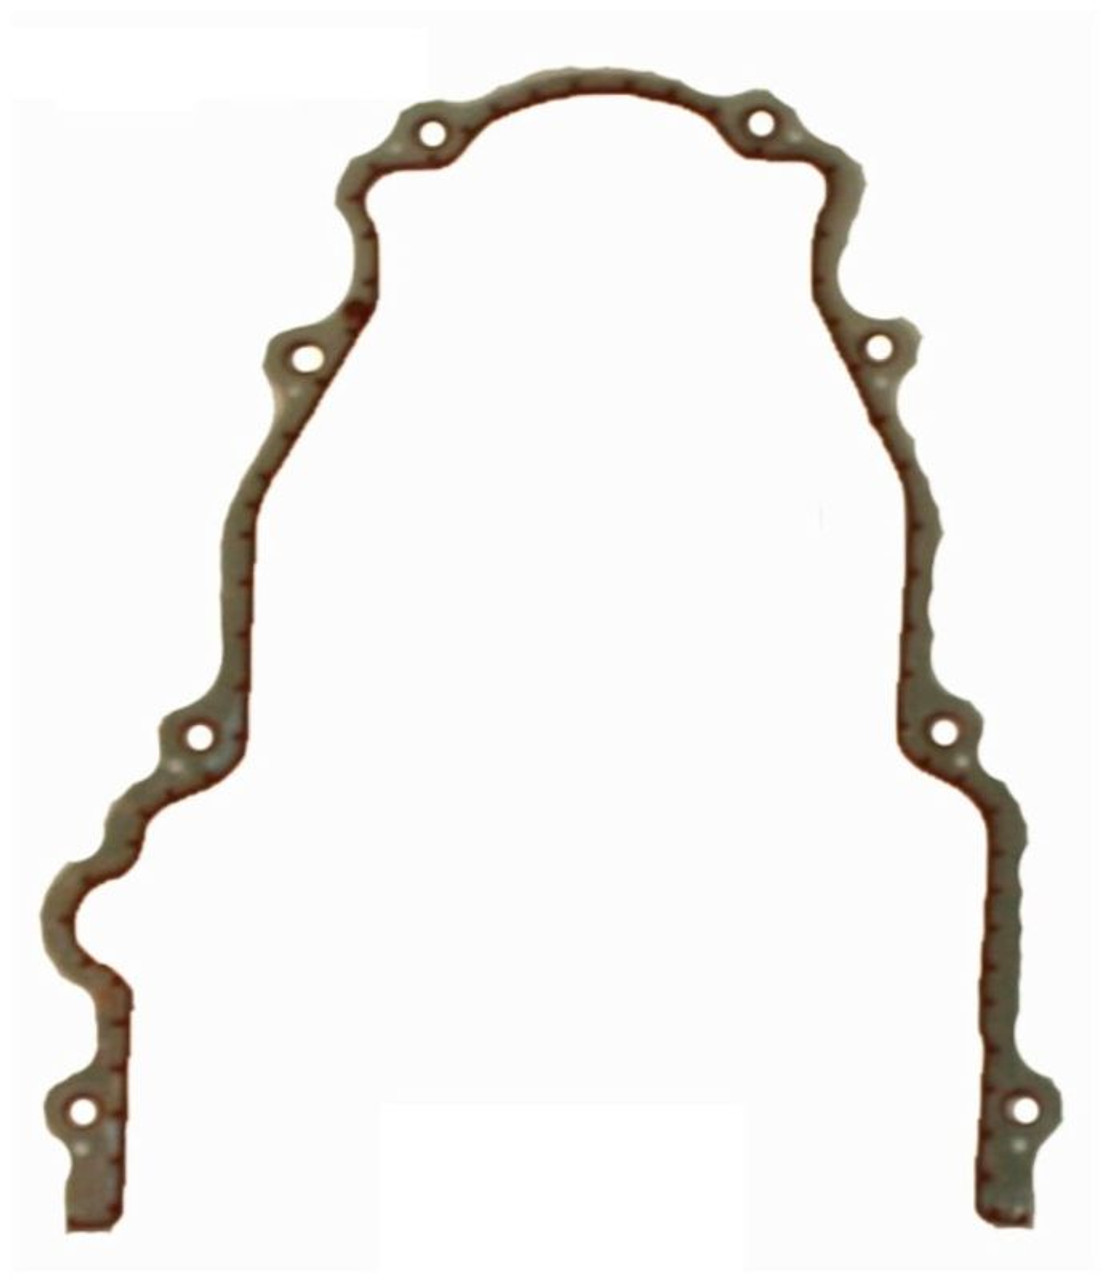 2004 Chevrolet Suburban 2500 6.0L Engine Timing Cover Gasket TCG293-A -205